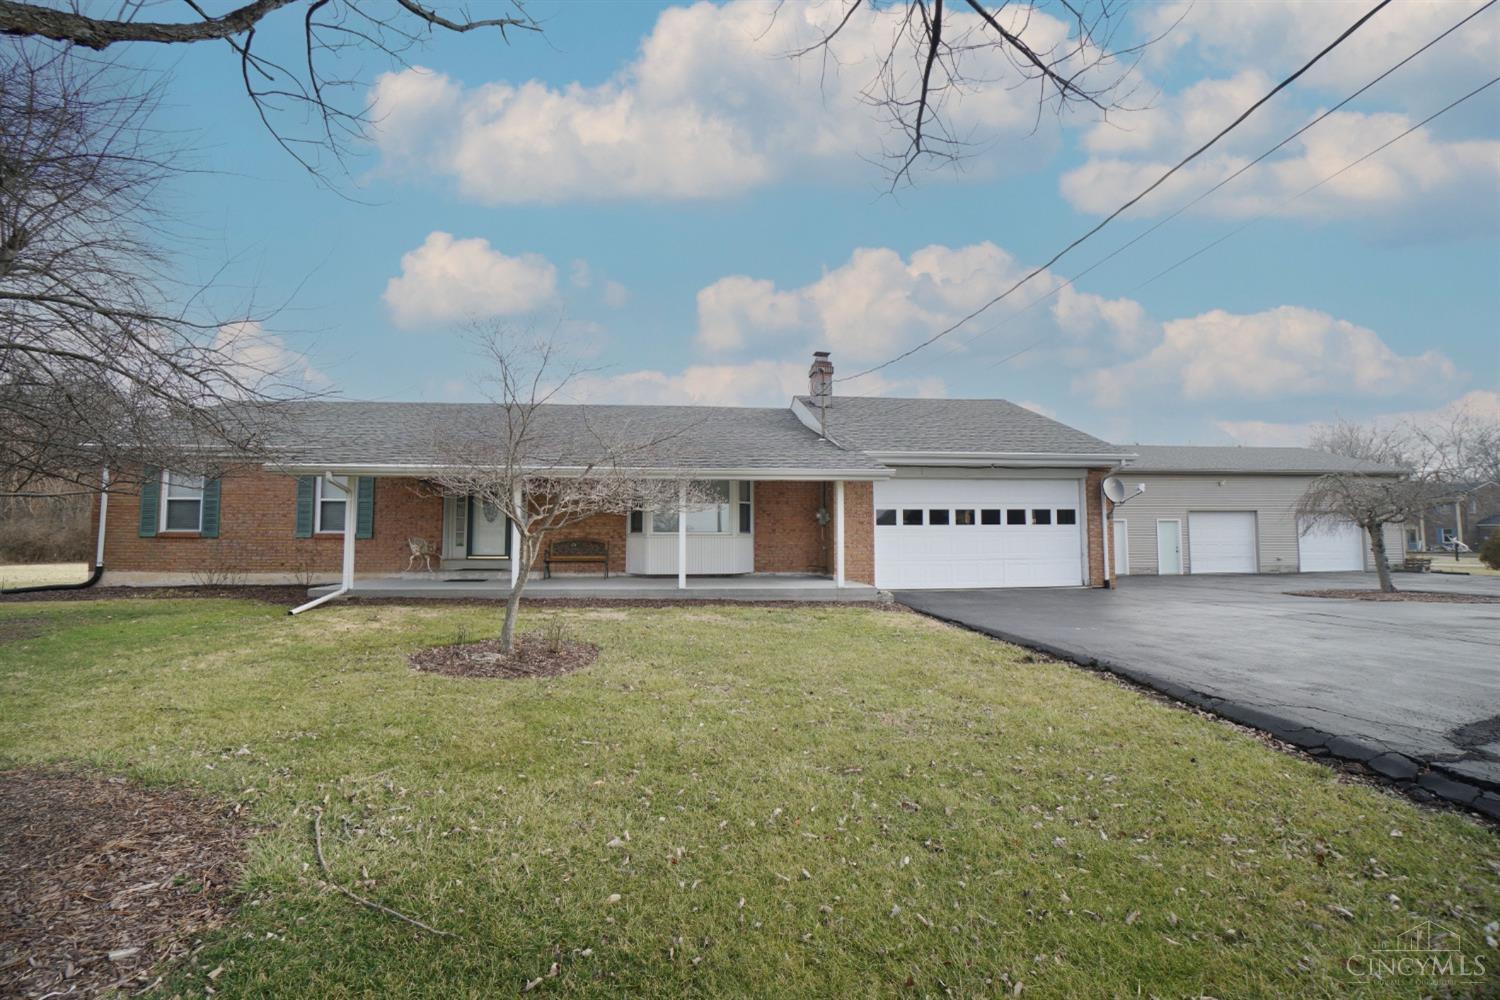 8475 Roachester Cozaddale Rd, Harlan Twp, OH 45162